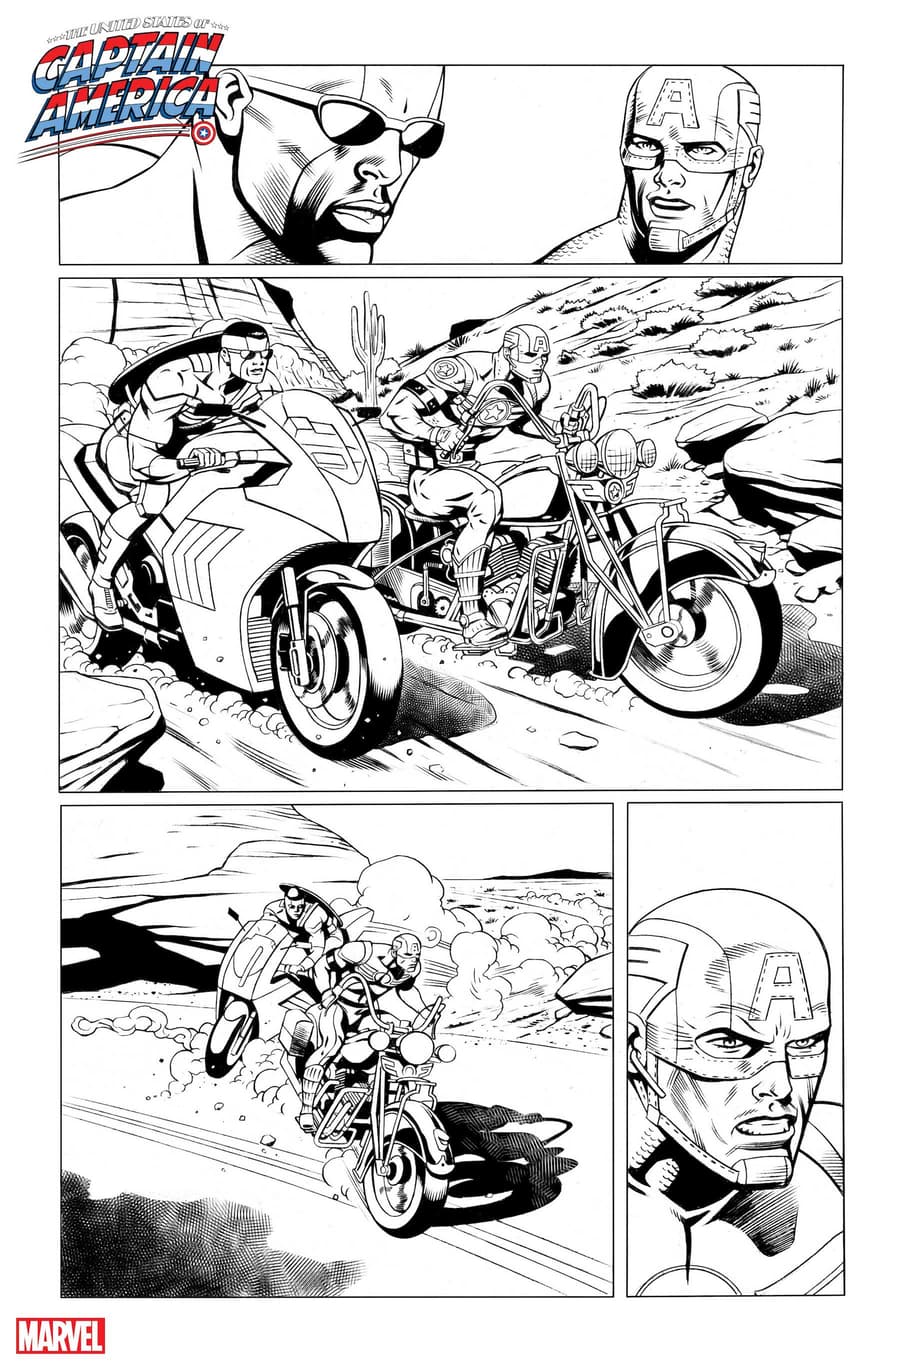 THE UNITED STATES OF CAPTAIN AMERICA #3 preview inks by Dale Eaglesham